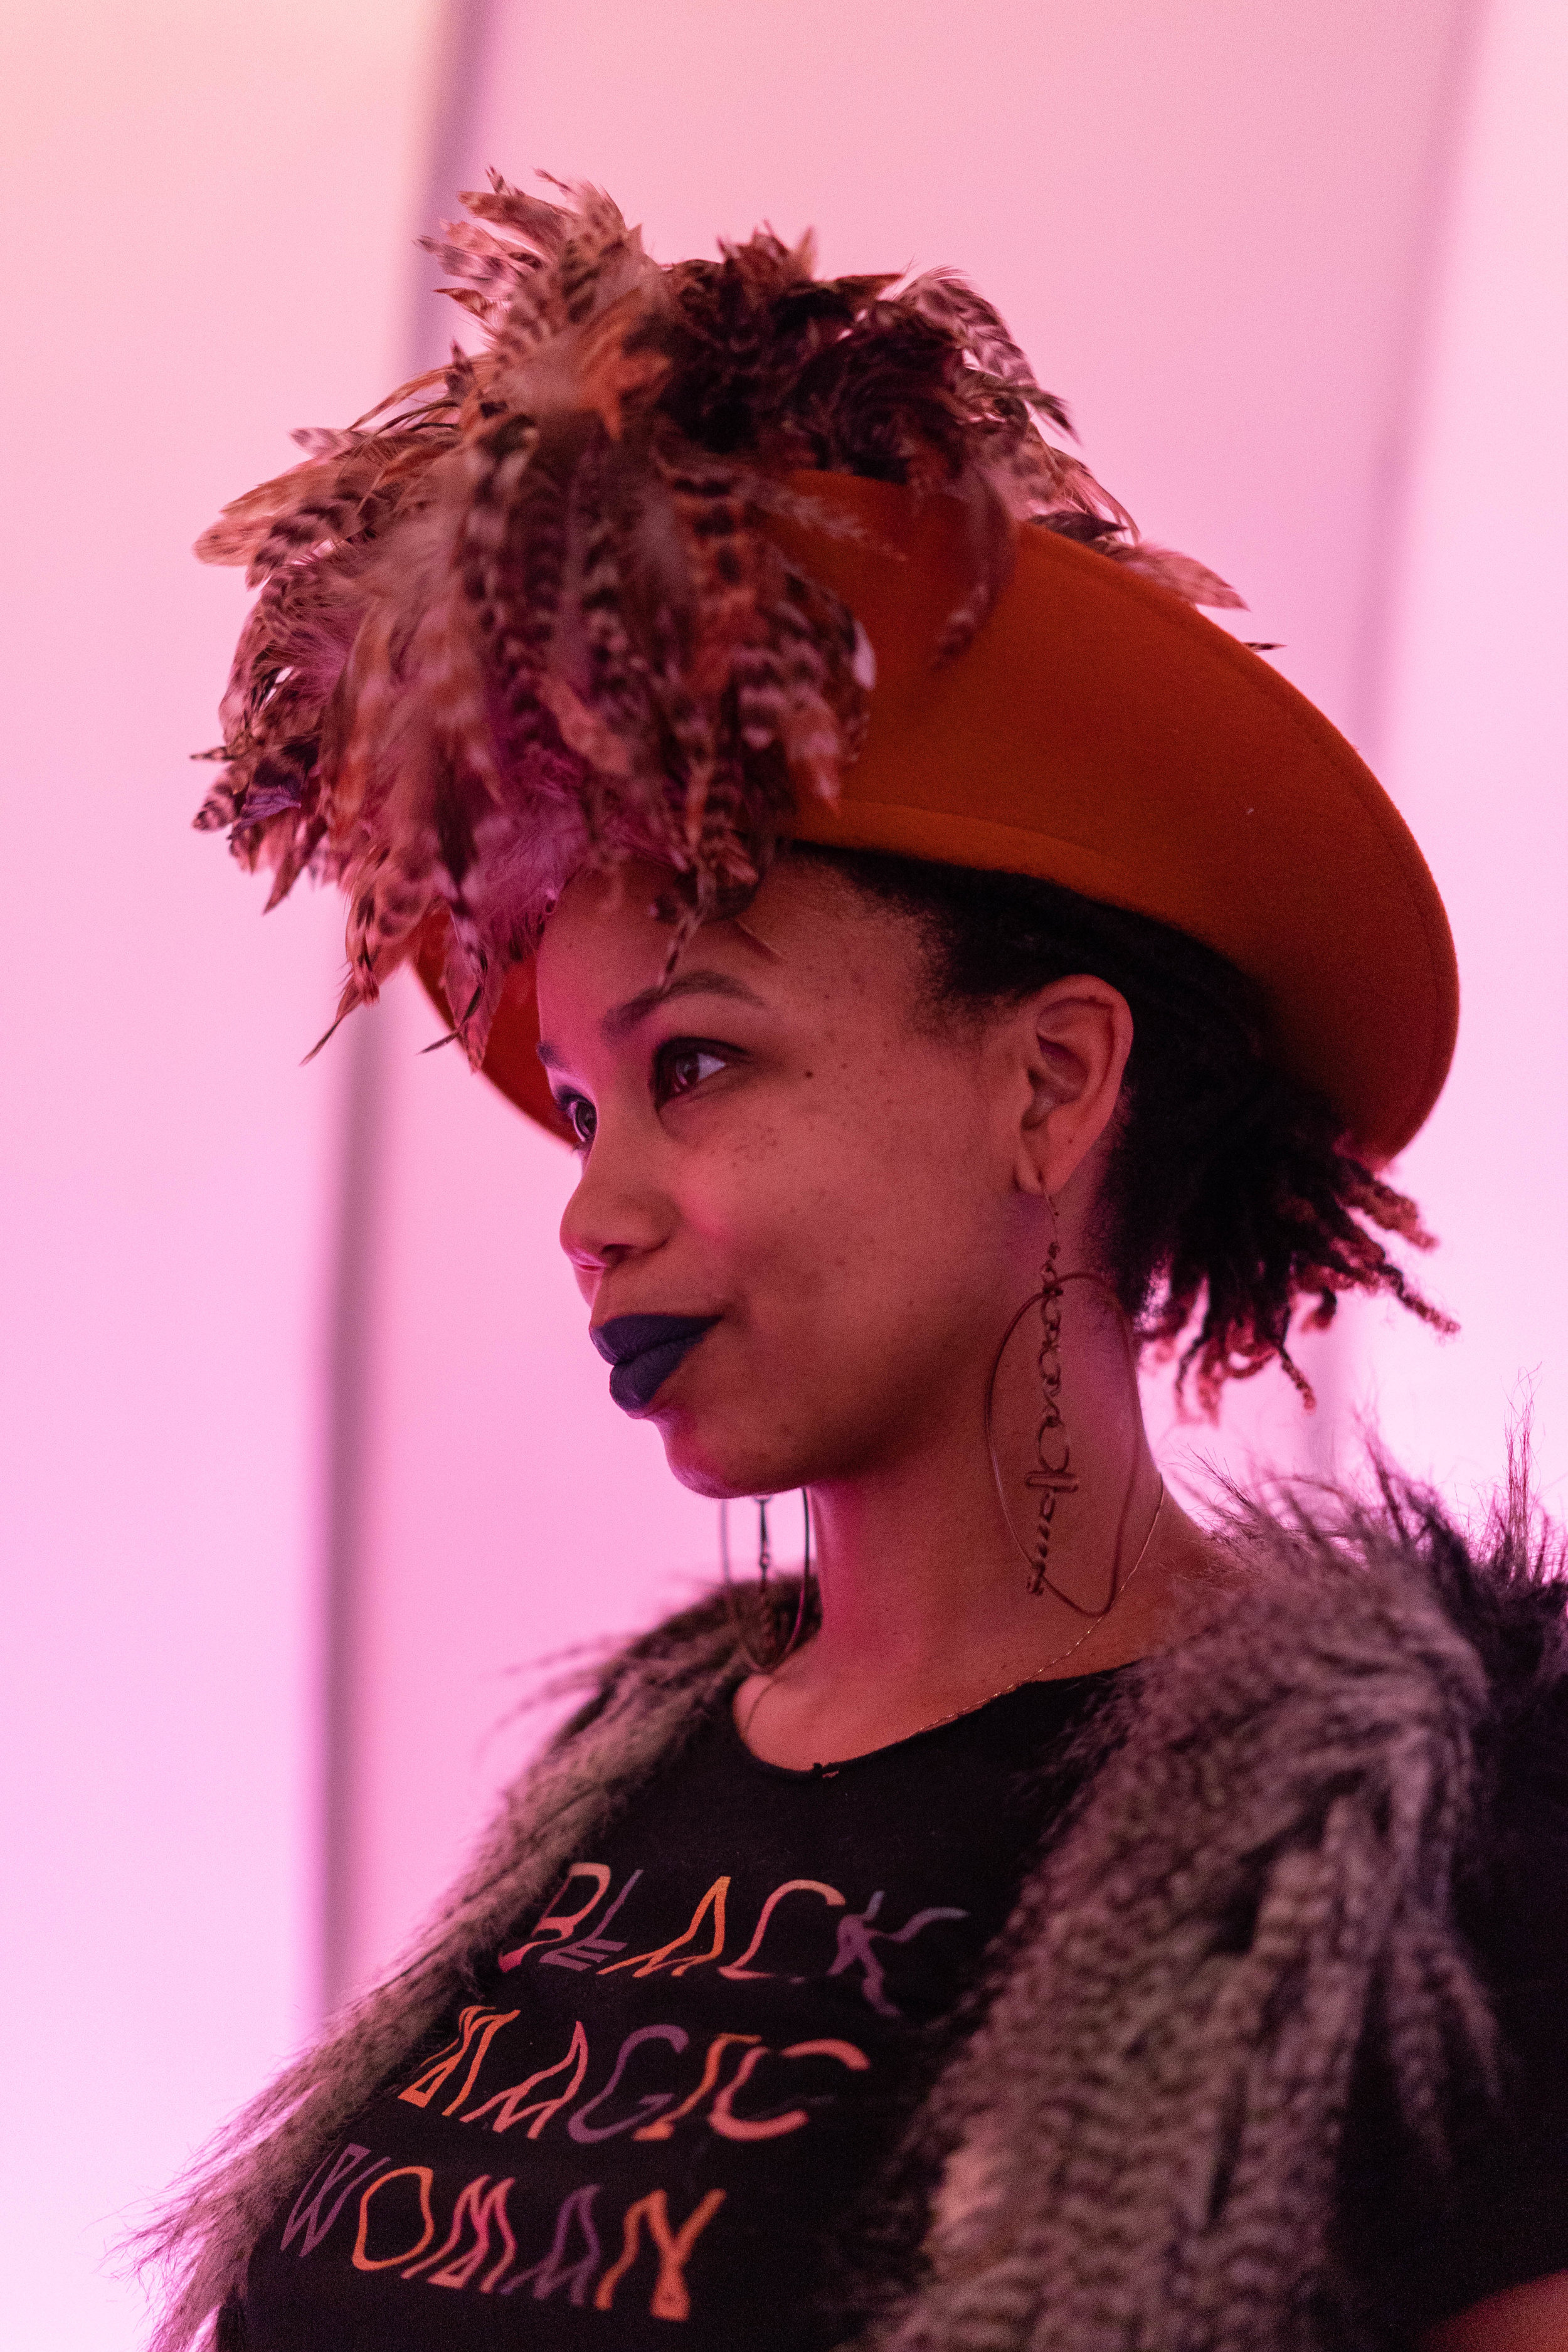  “I wanted to put something together unique and Wakanda-inspired but my natural flavor, too,” said Sandria Washington who dressed up for the event.   